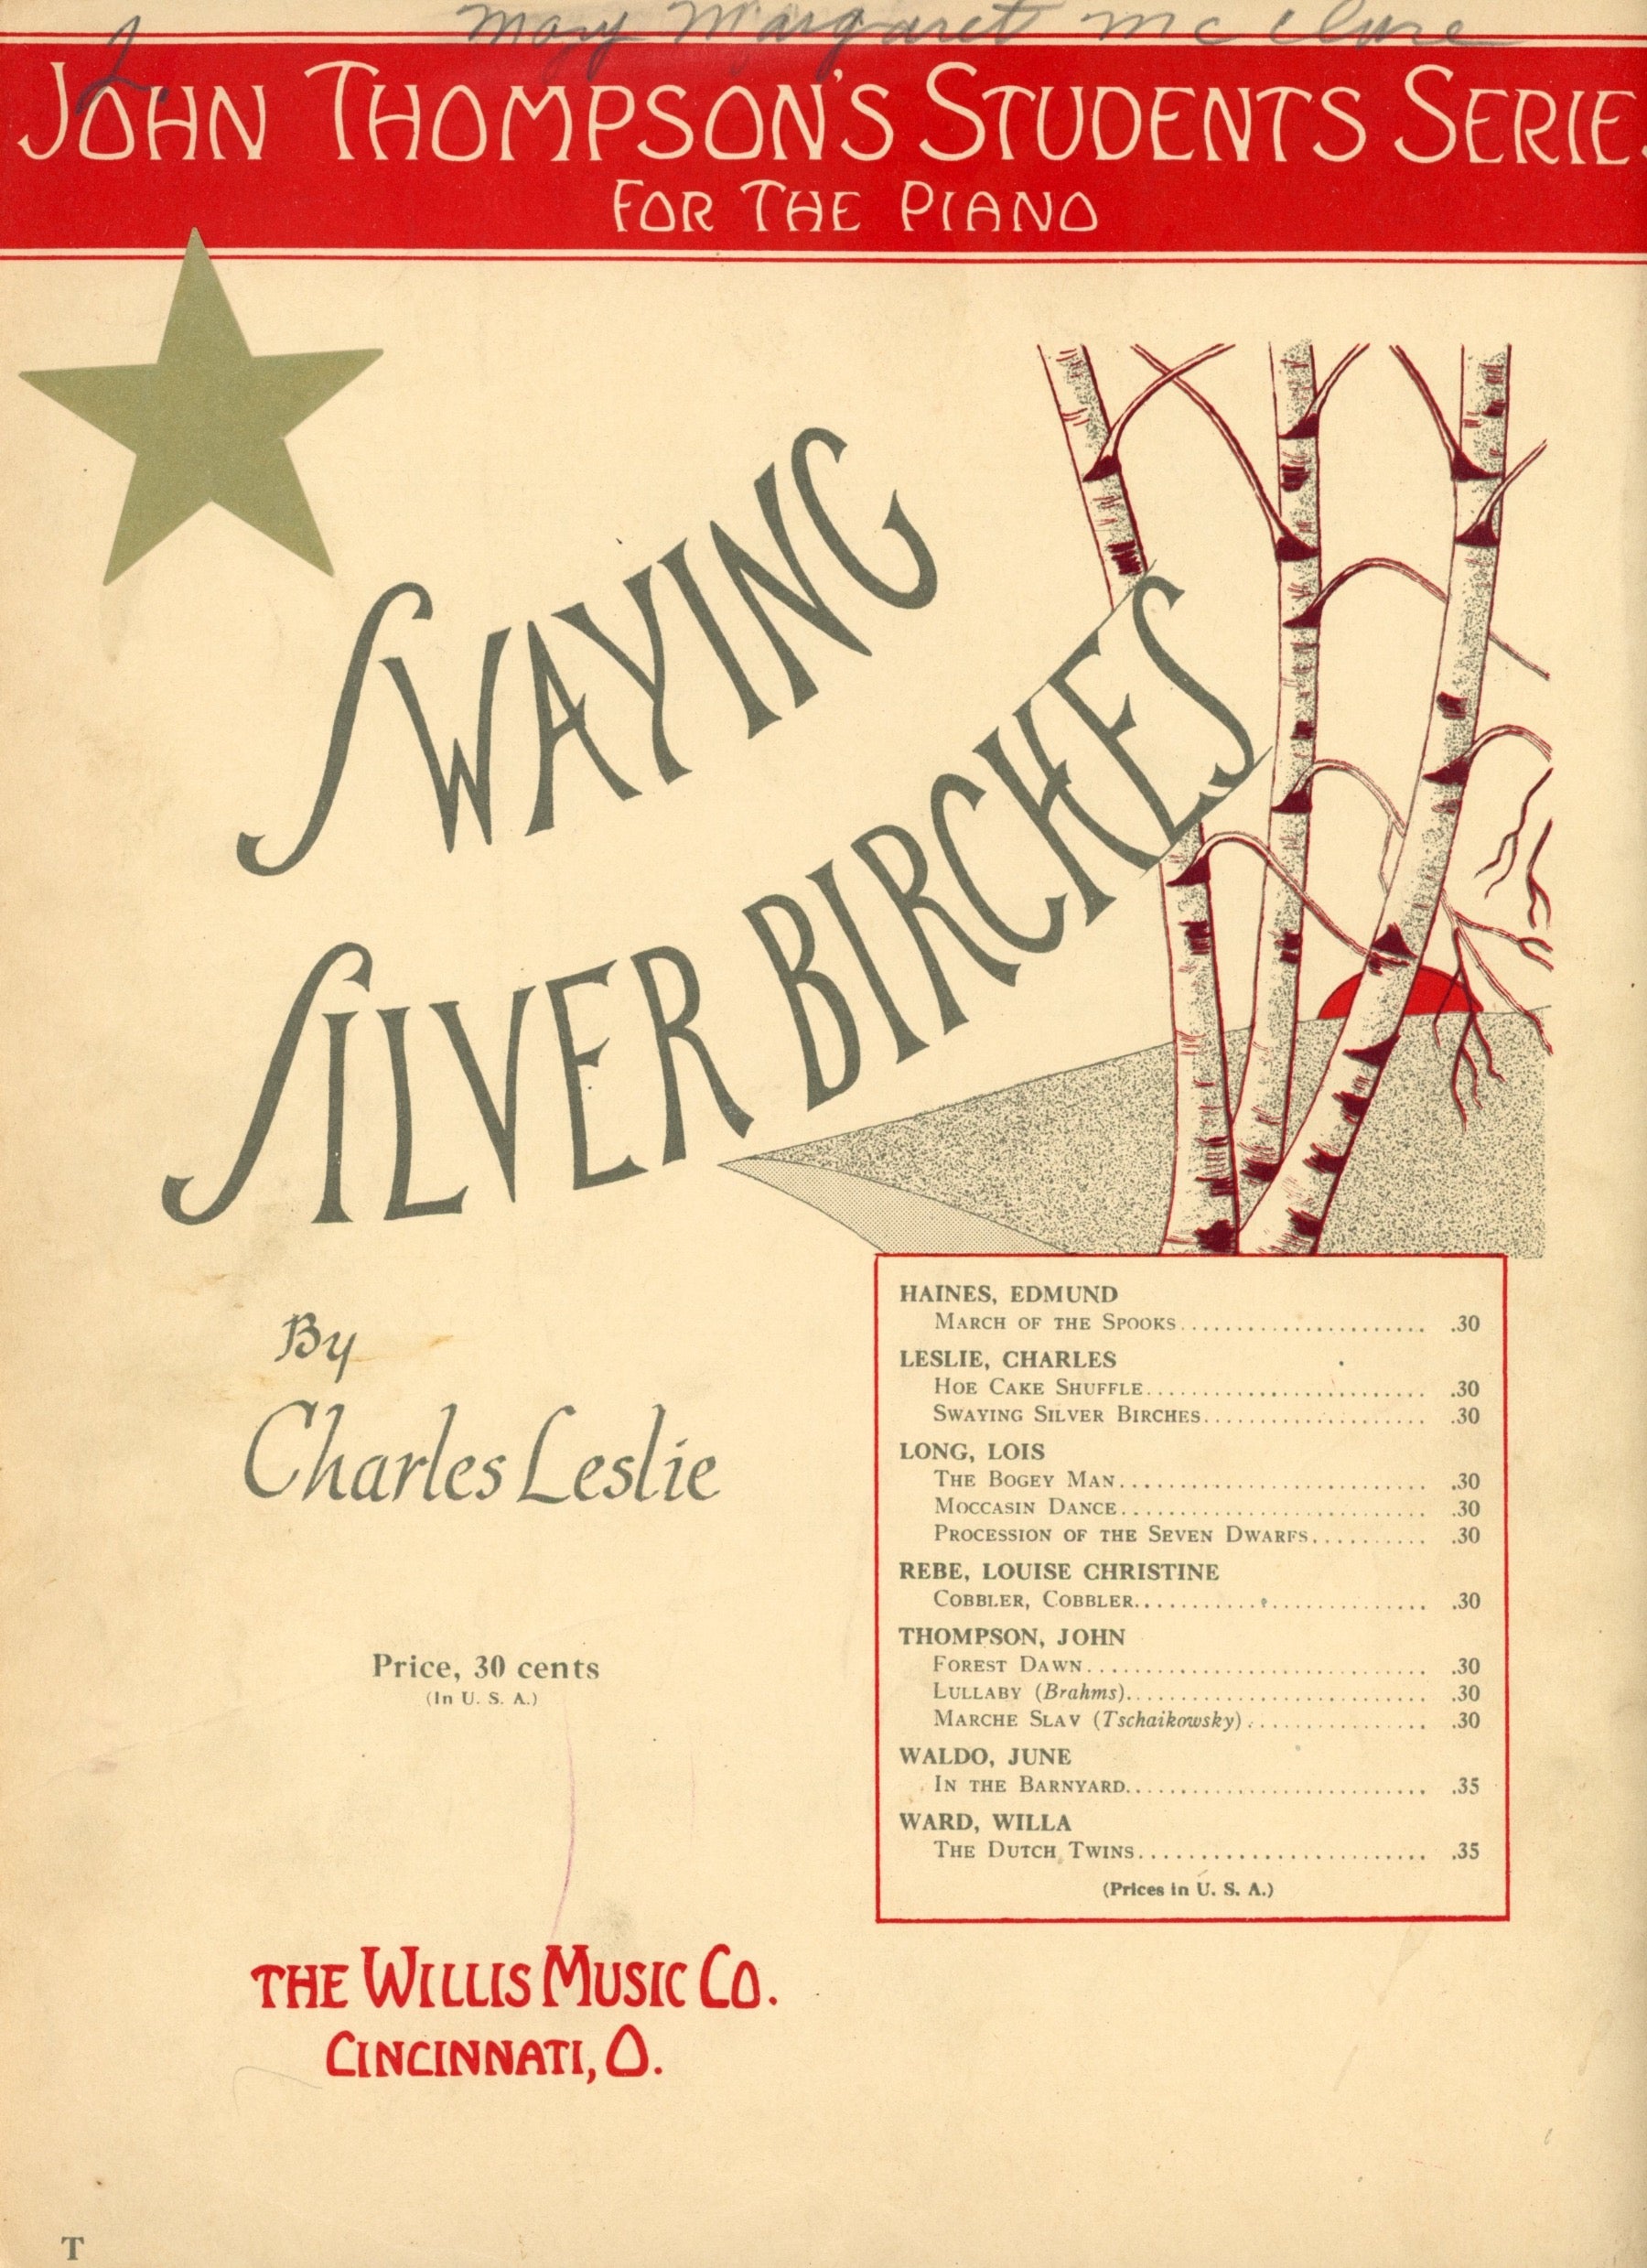 SWAYING SILVER BIRCHES Vintage Sheet Music by Charles Leslie ©1936